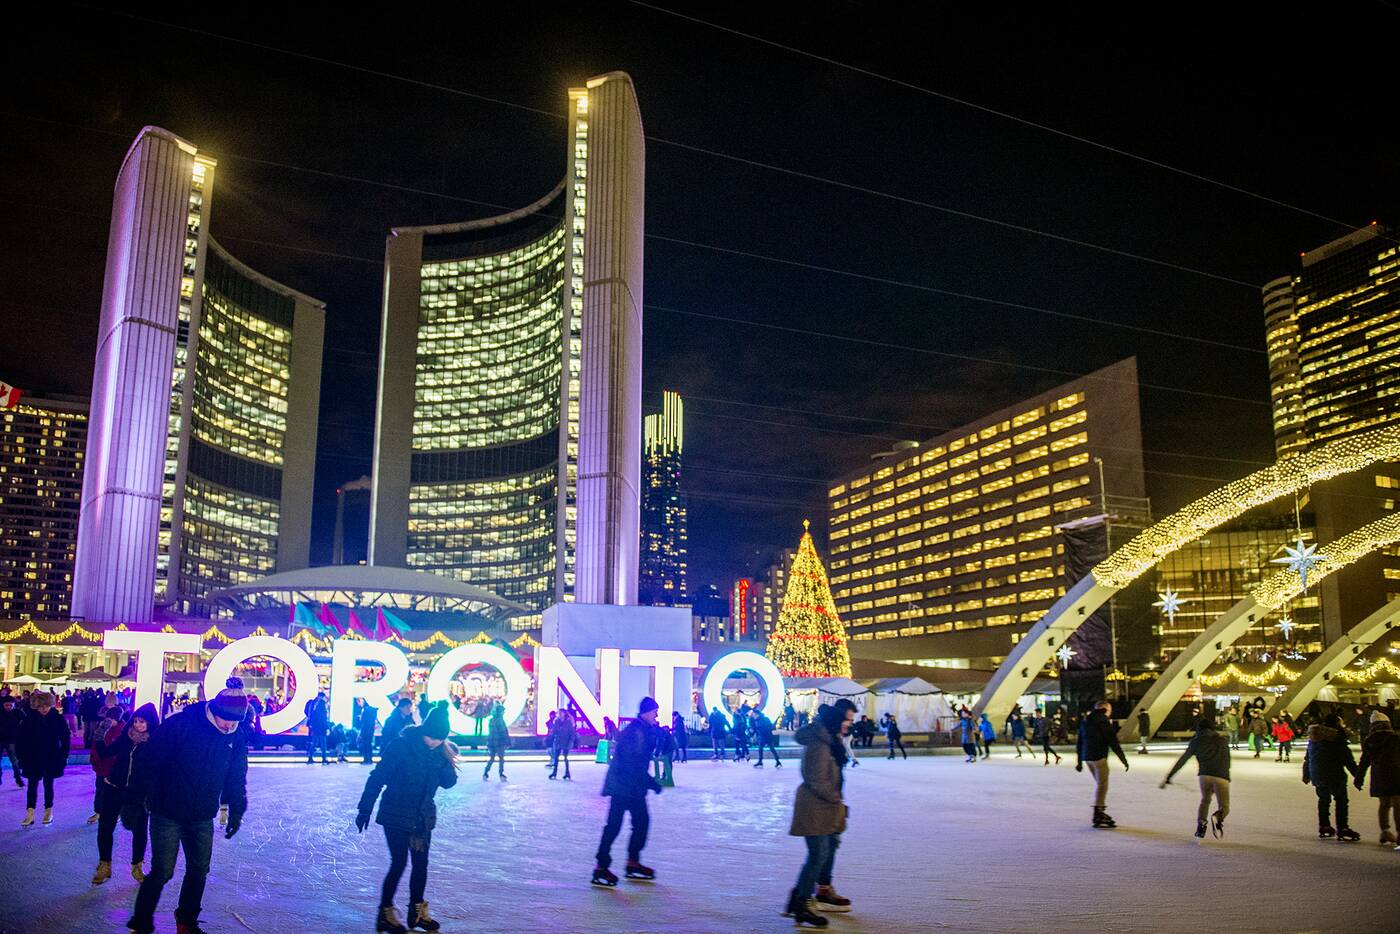 Here's what Toronto's newest Christmas market looks like